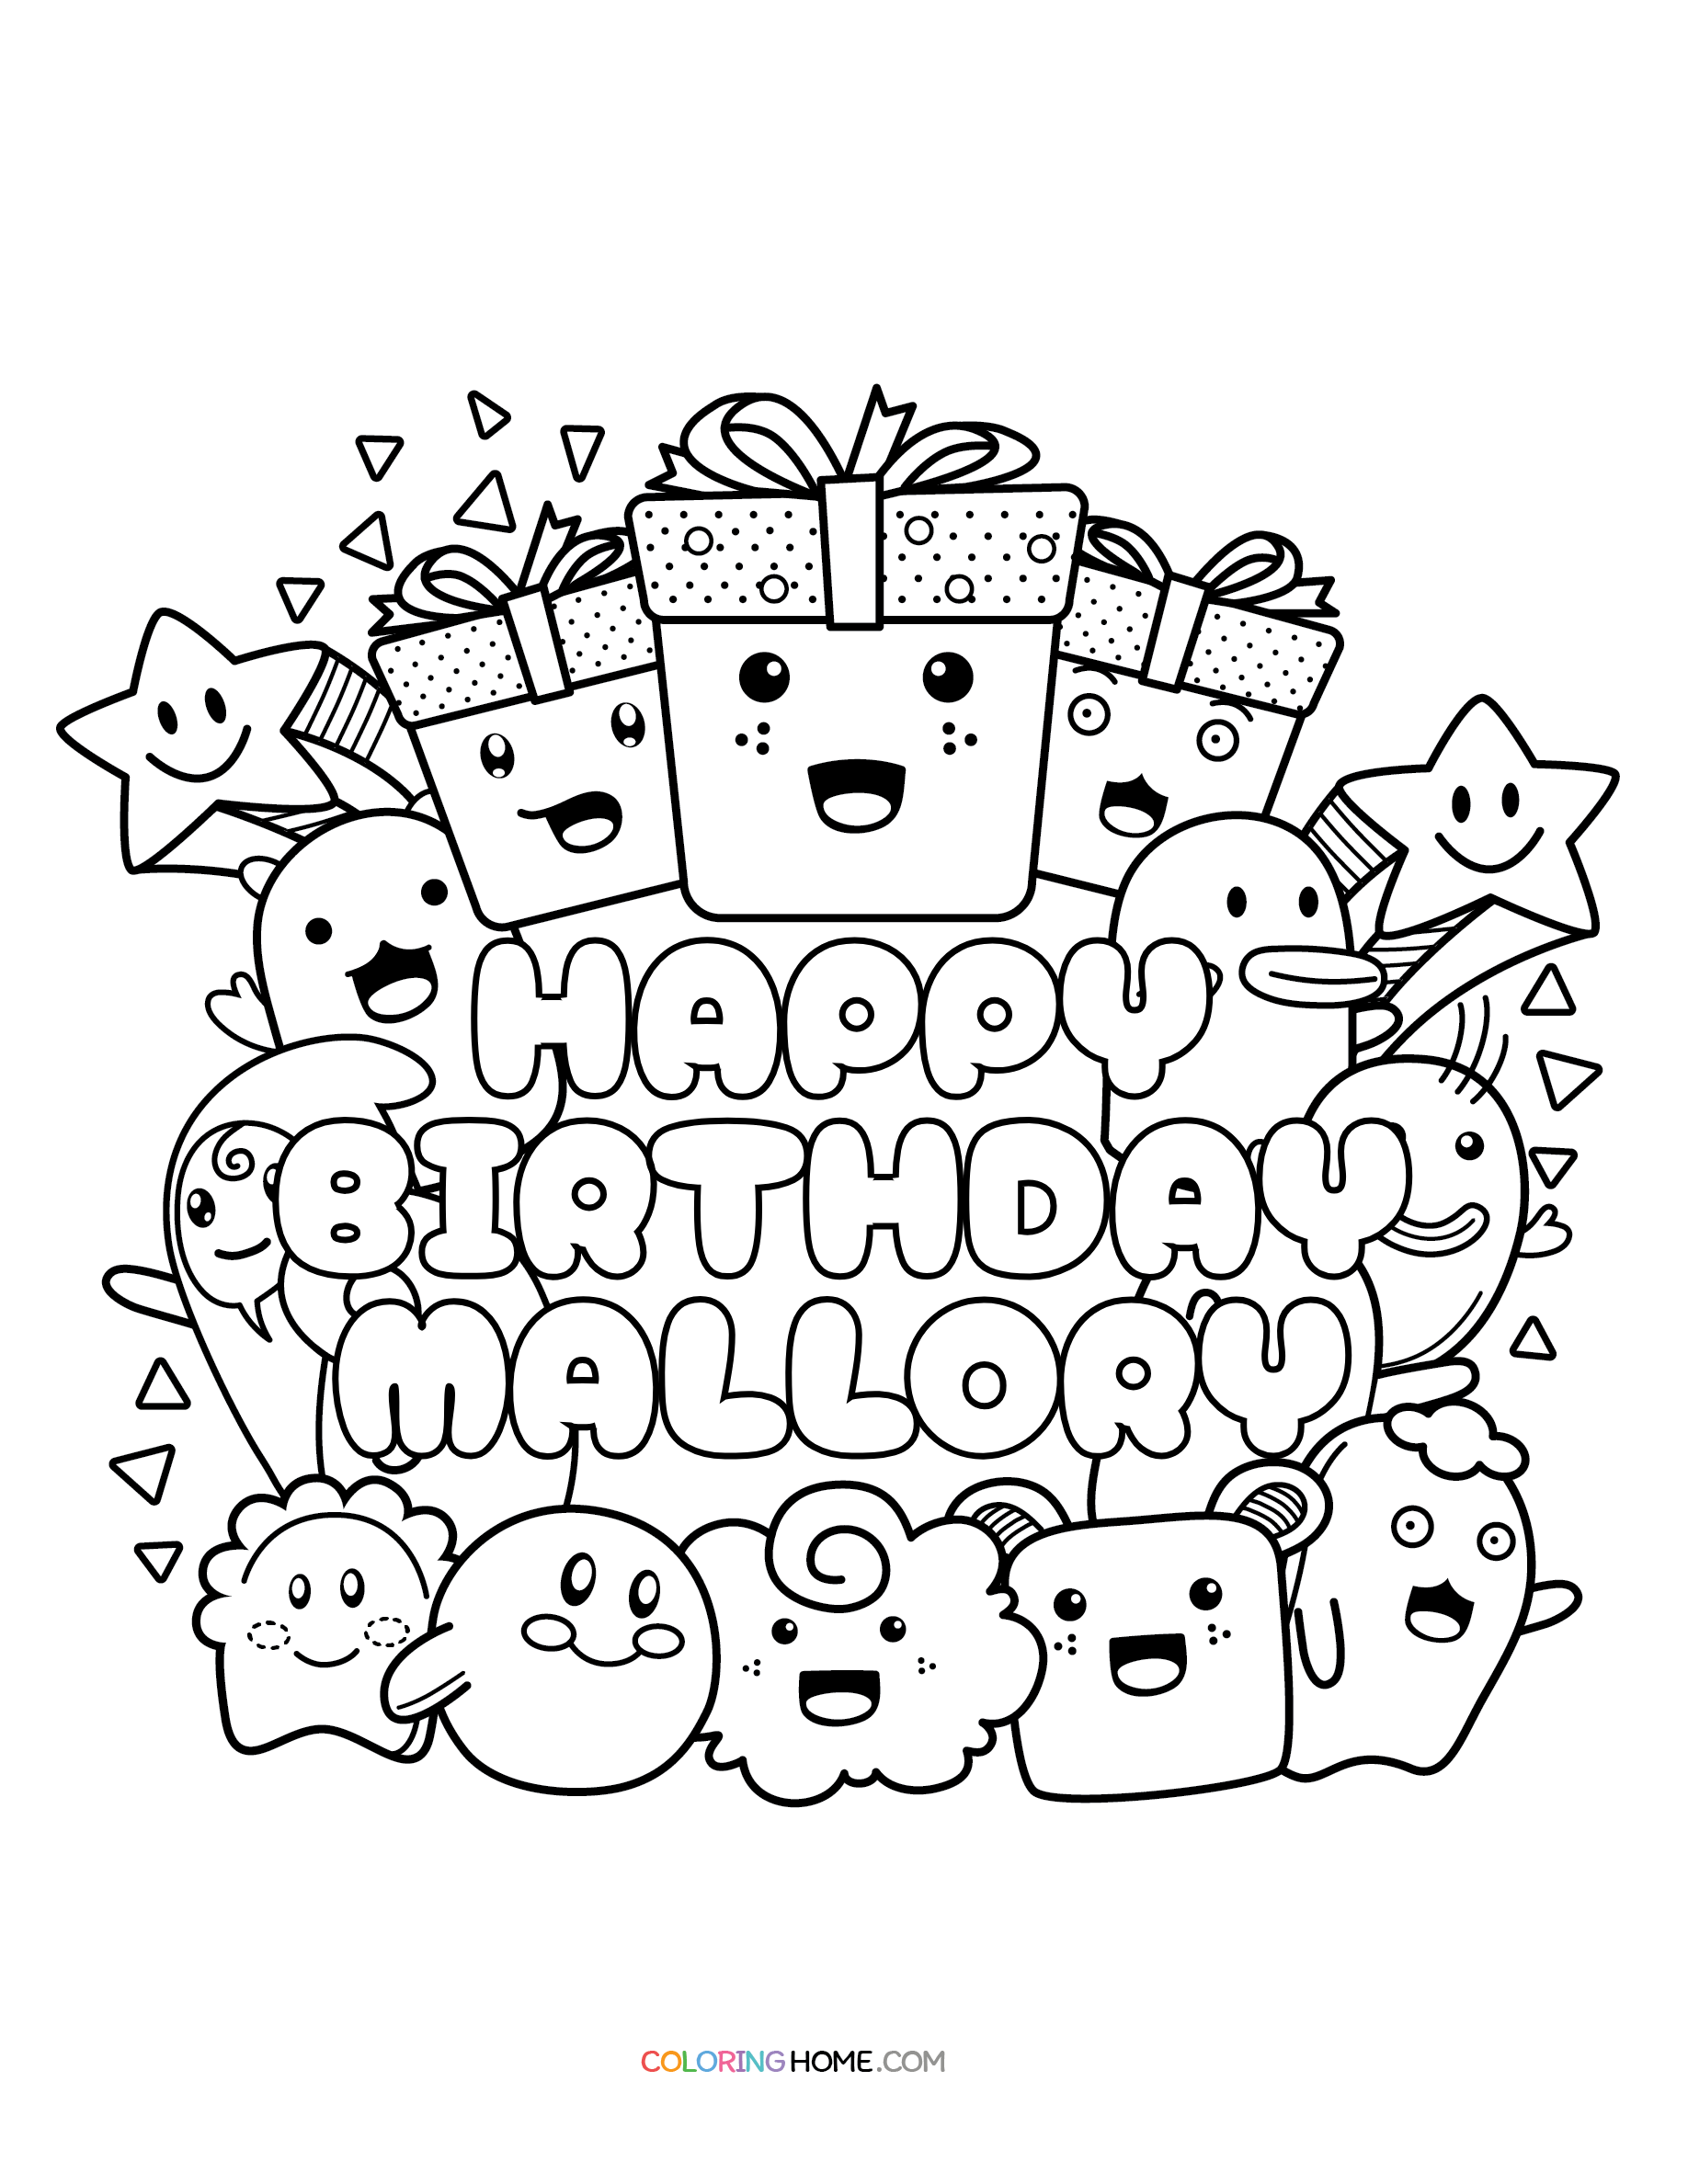 Happy Birthday Mallory coloring page